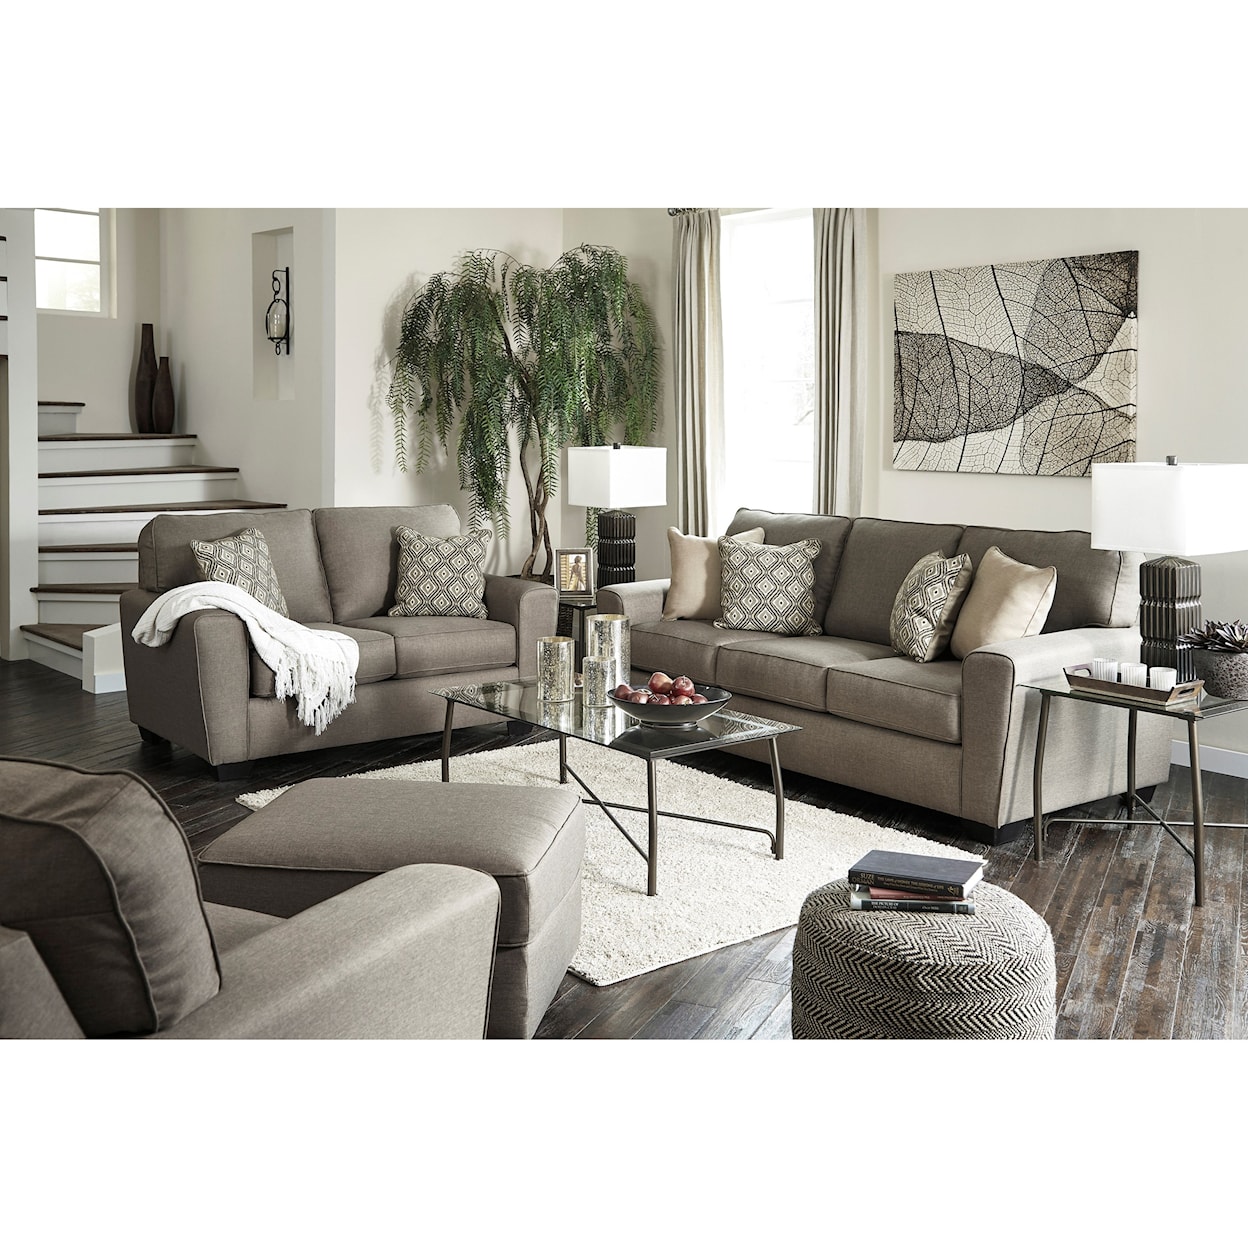 Ashley Furniture Benchcraft Calicho Stationary Living Room Group